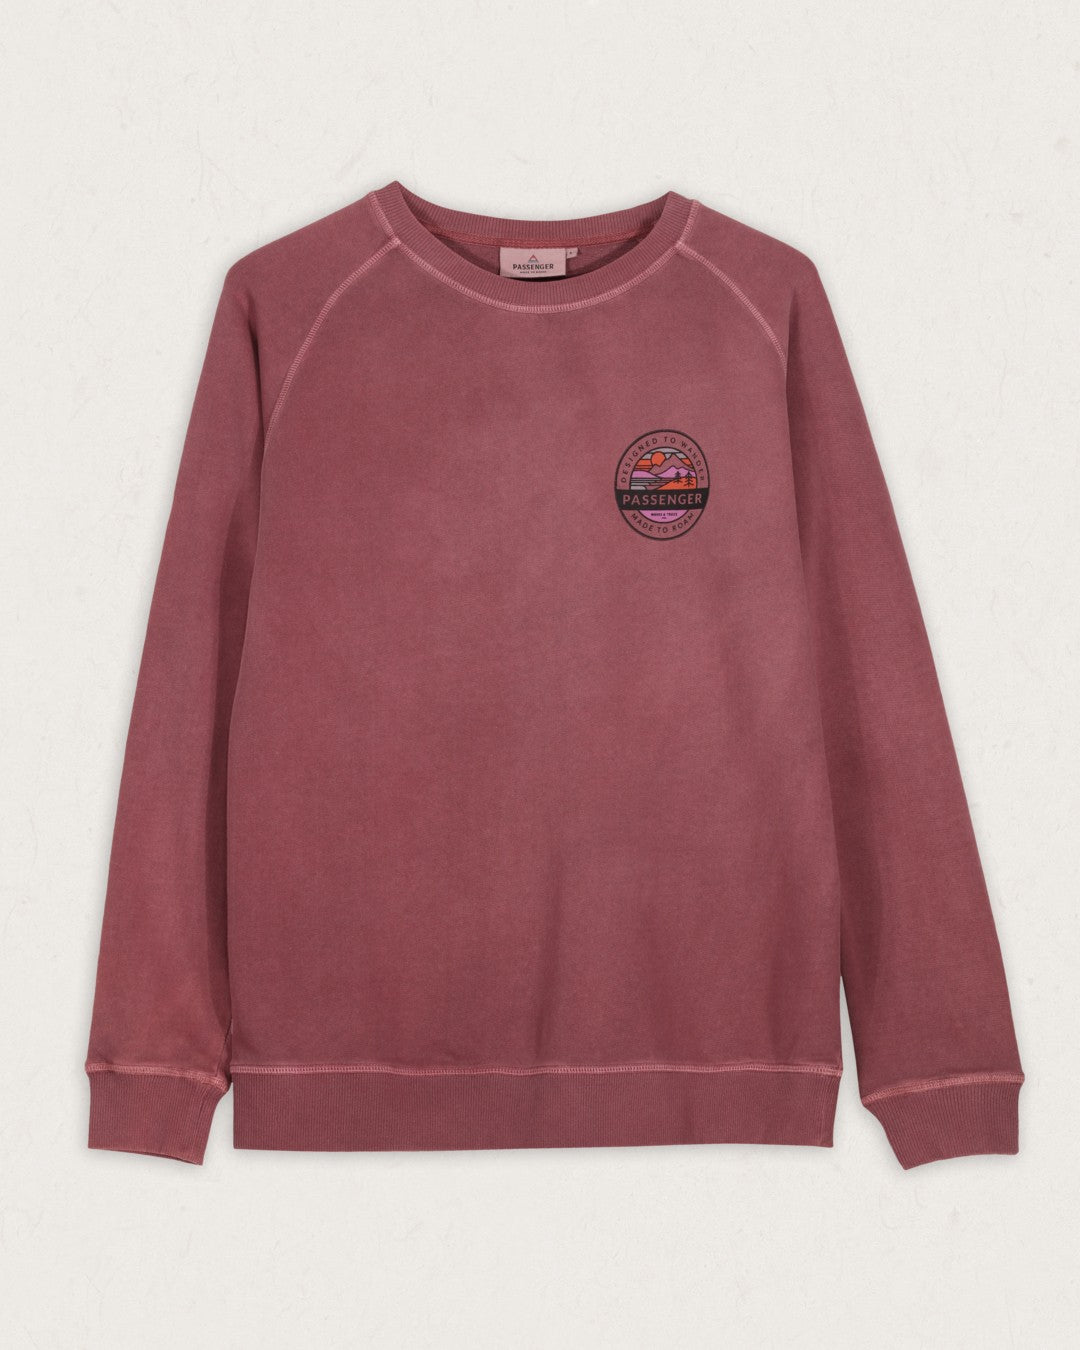 Wilds Recycled Cotton Oversized Sweatshirt - Crushed Berry